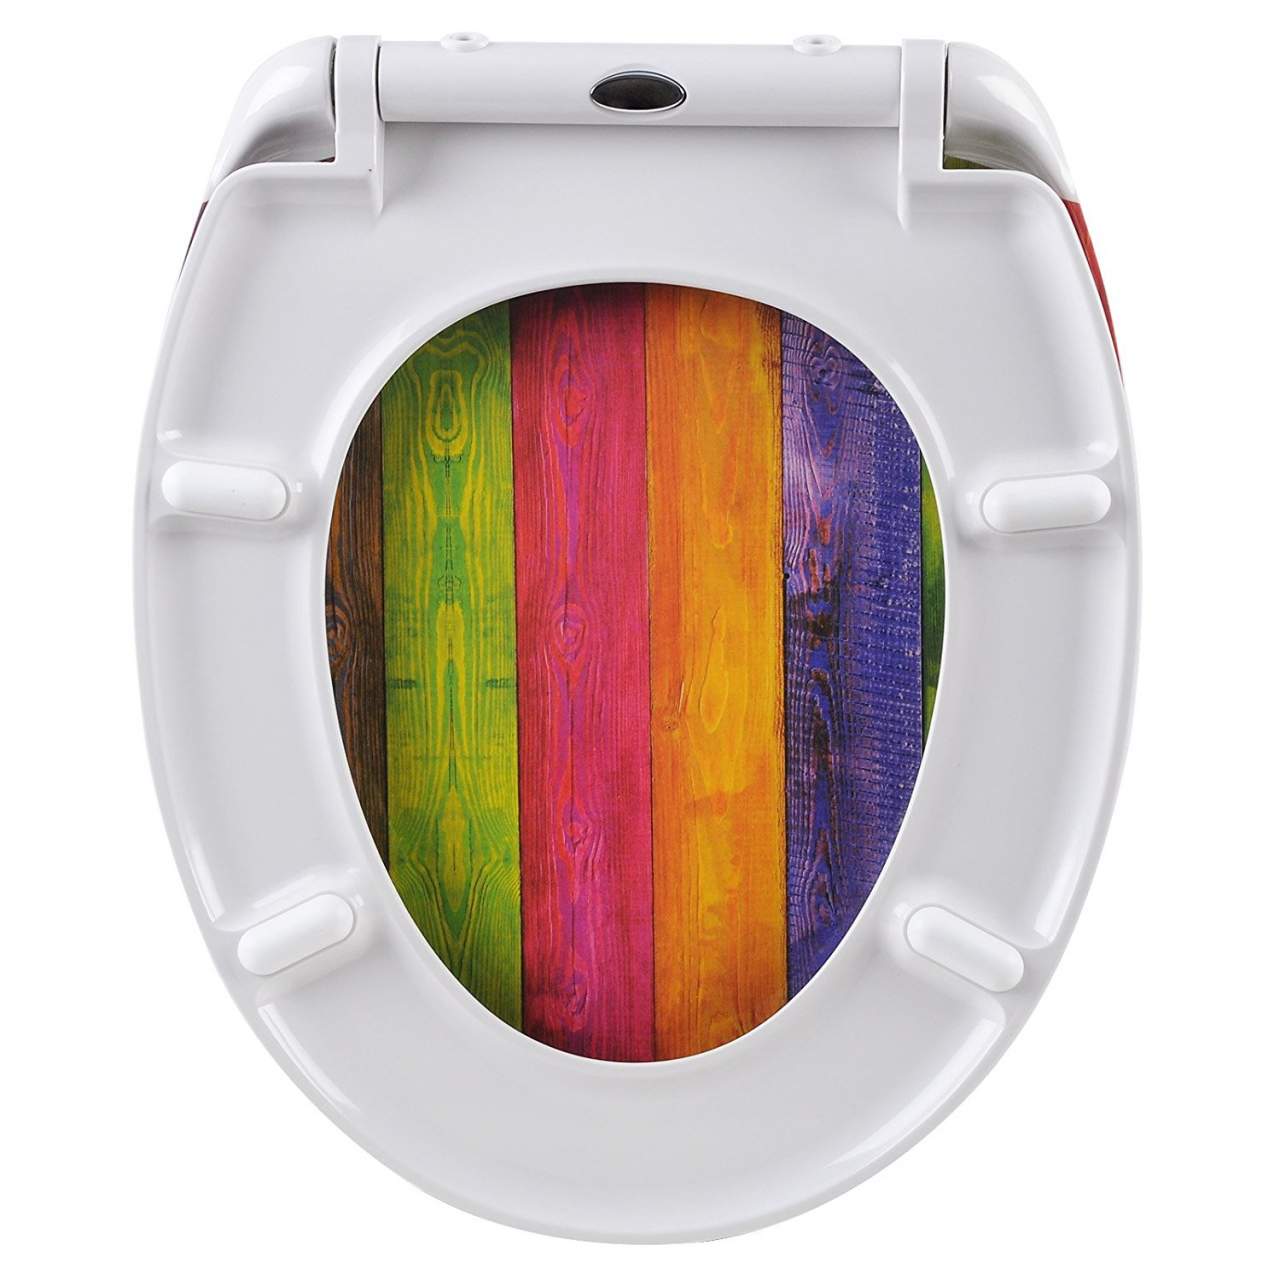 WOLTU Quick Release Toilet Seat with Soft Close Slow Hinge Attached Fittings Antibacterial for Bathroom 